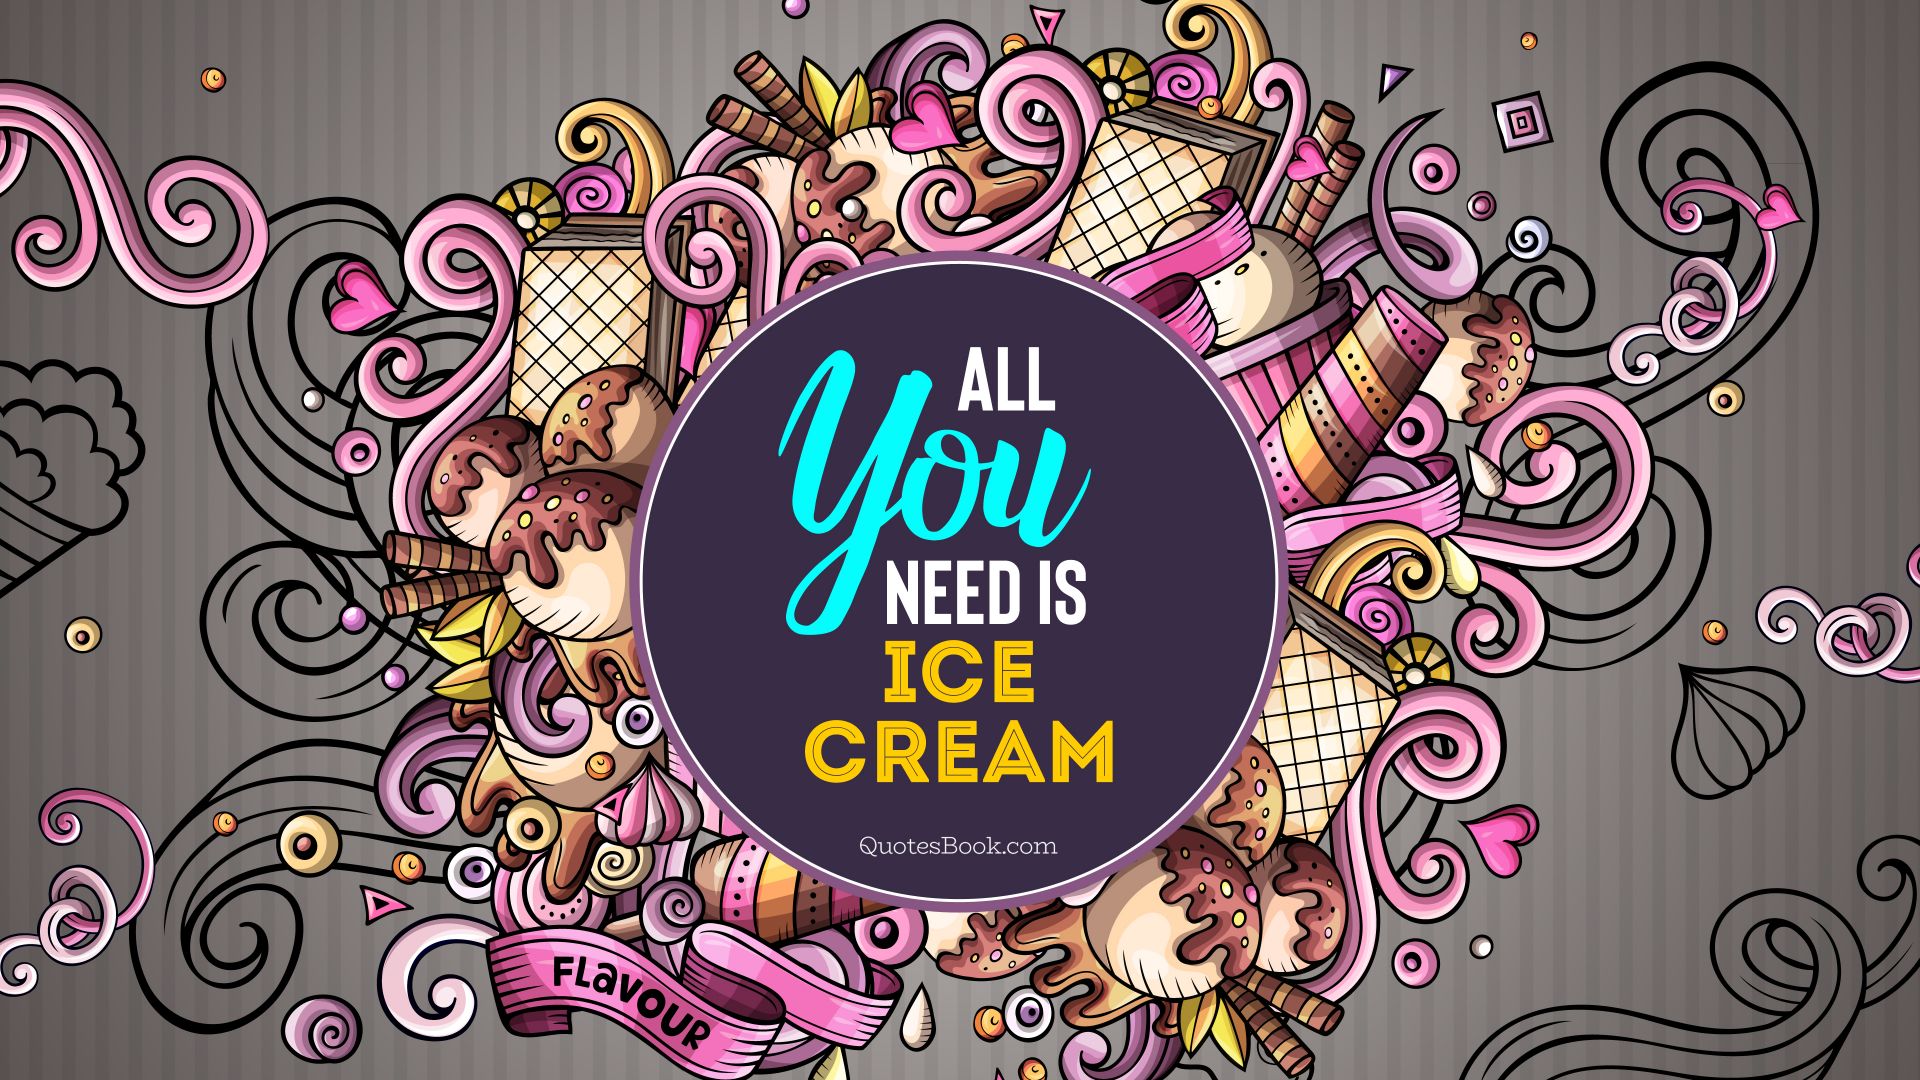 All you need is ice cream